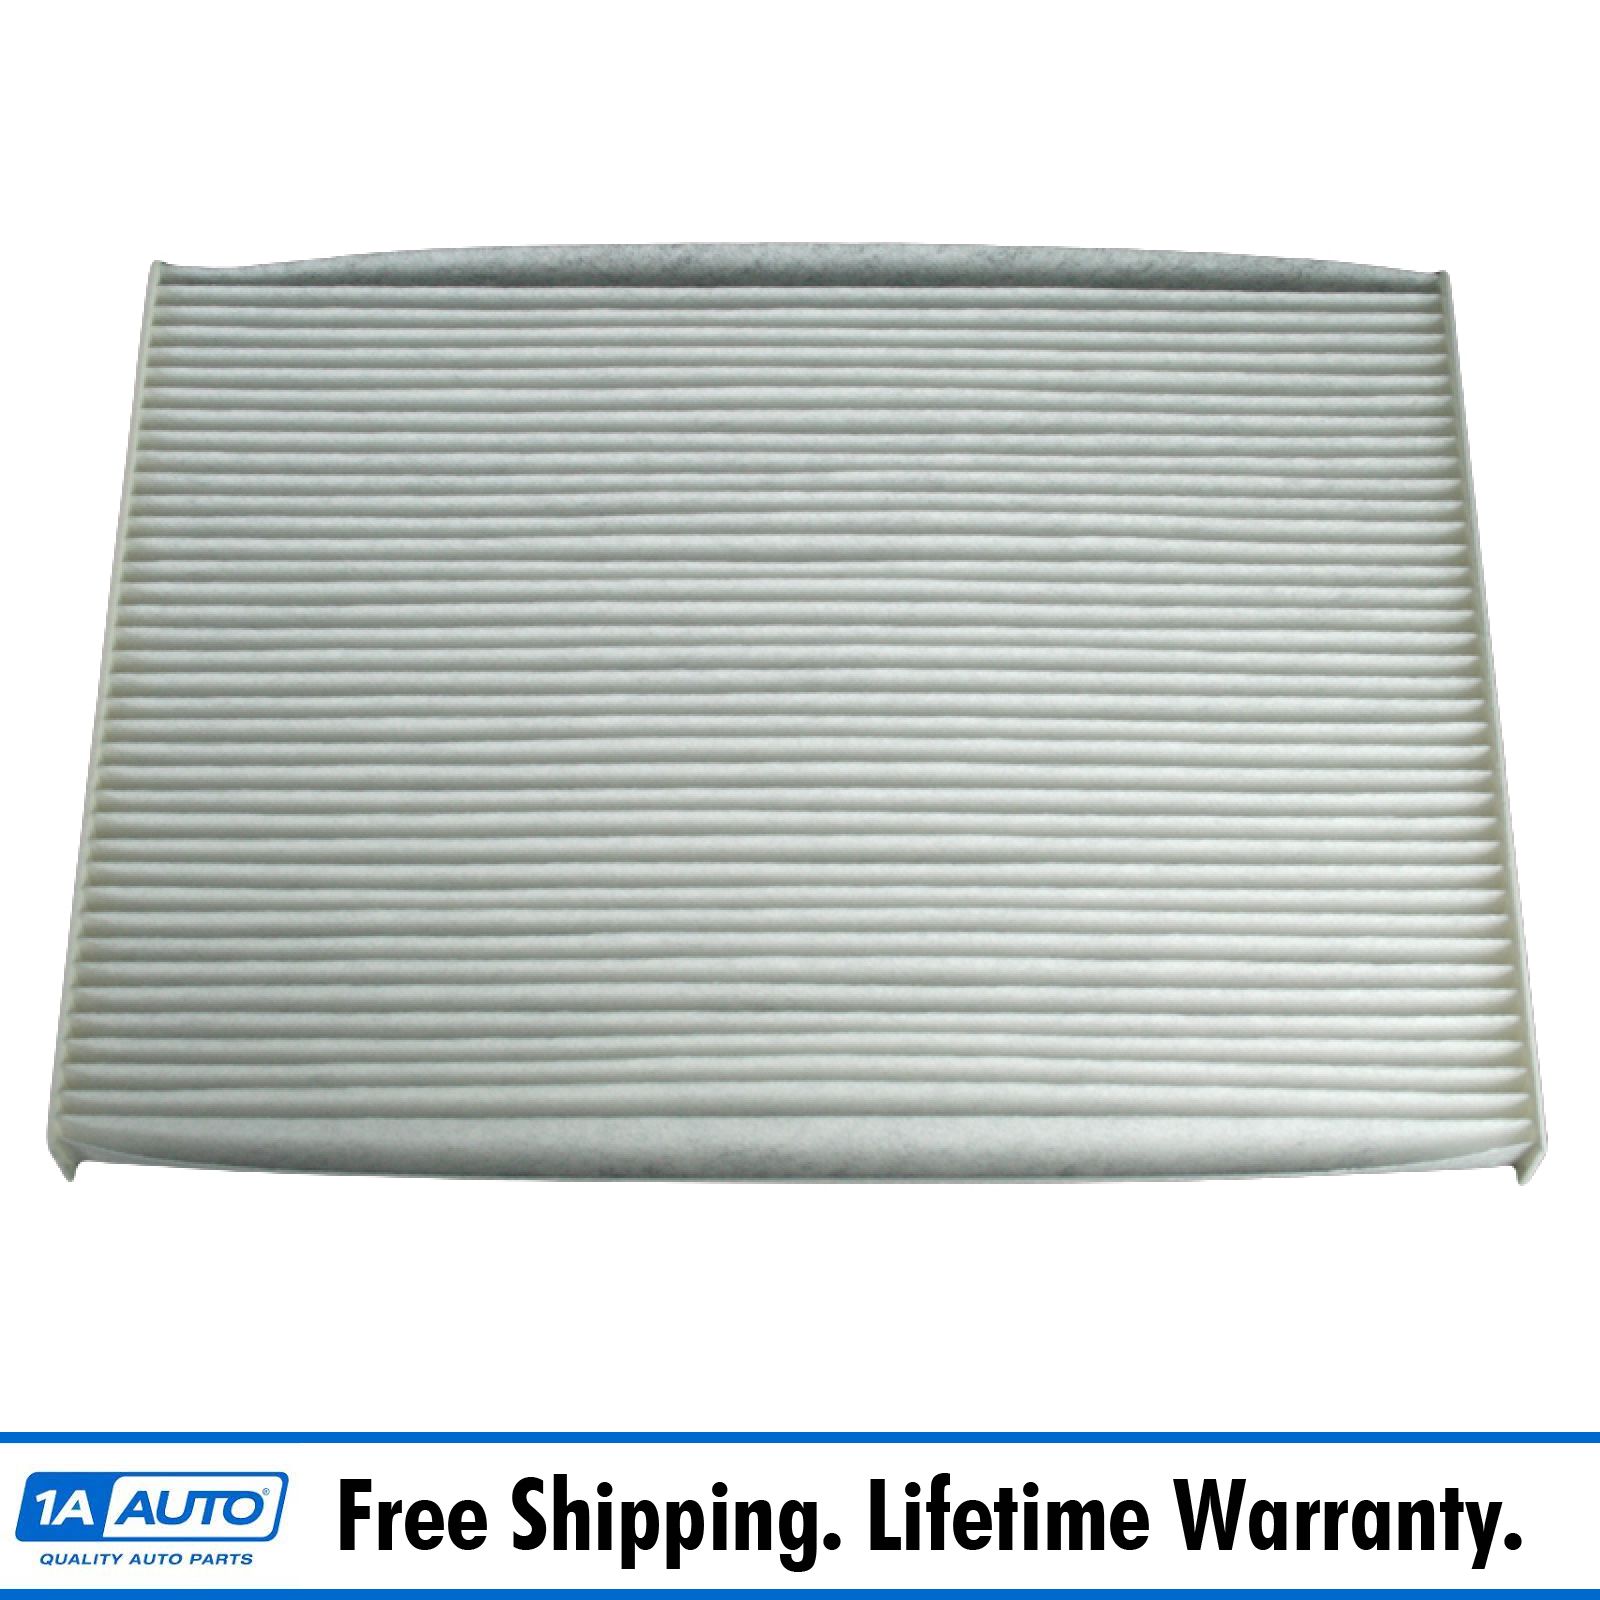 Paper Style Replacement Cabin Air Blower Filter For 07-12 Nissan Sentra Rogue | eBay 2010 Nissan Sentra Cabin Air Filter Replacement